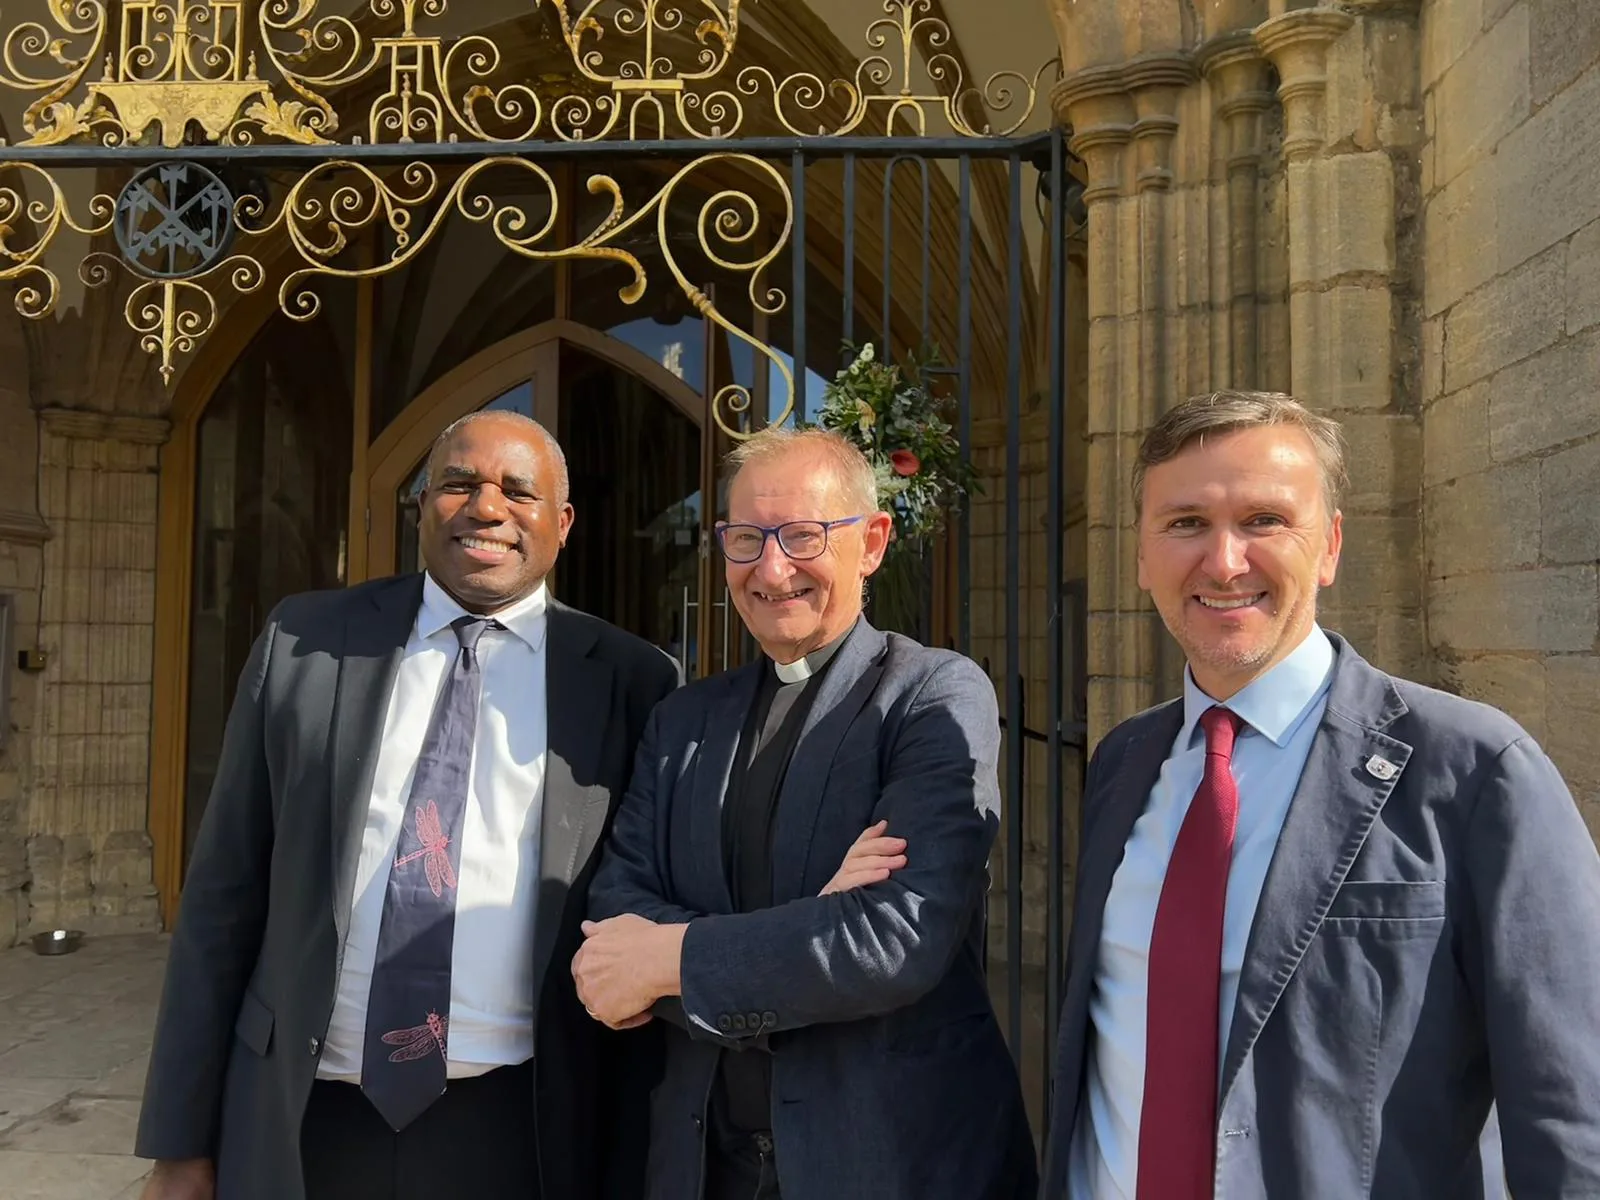 Dean of Peterborough Cathedral, the Very Revd Chris Dalliston, with David Lammy, Shadow Foreign Secretary, and Peterborough prospective Parliamentary candidate Andrew Pakes